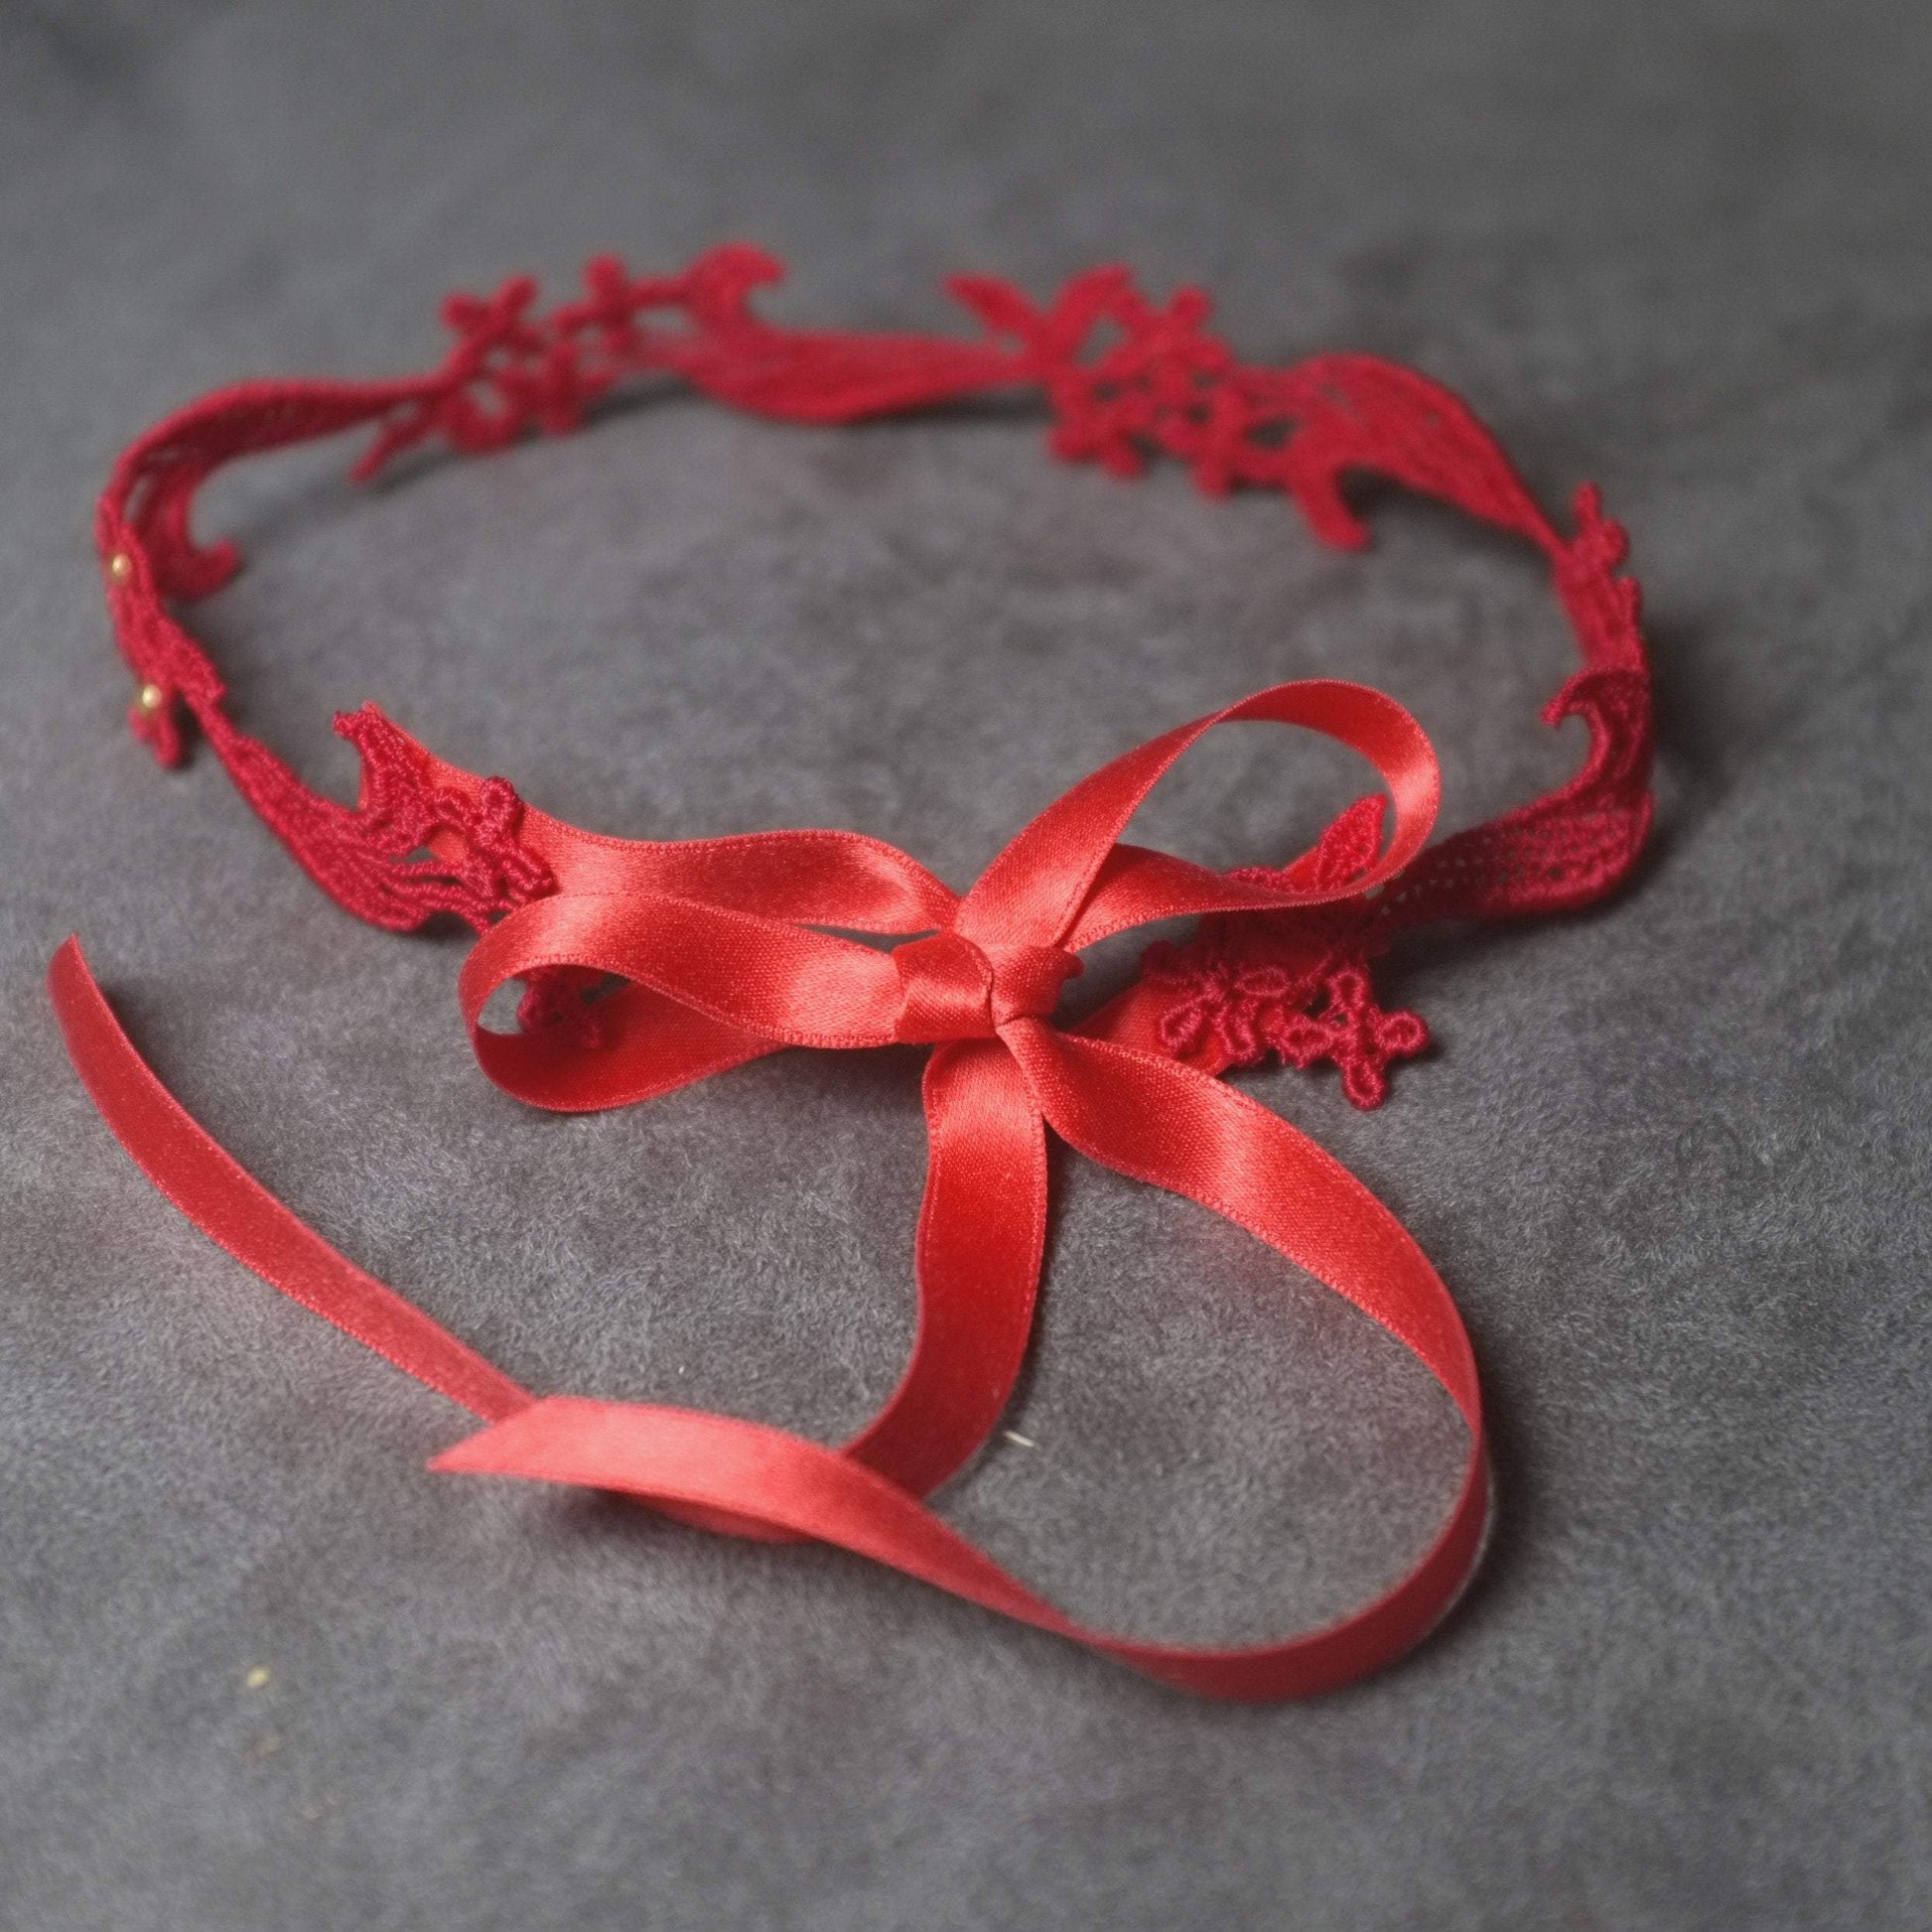 Red Lace Choker with Silk Ribbon closure.